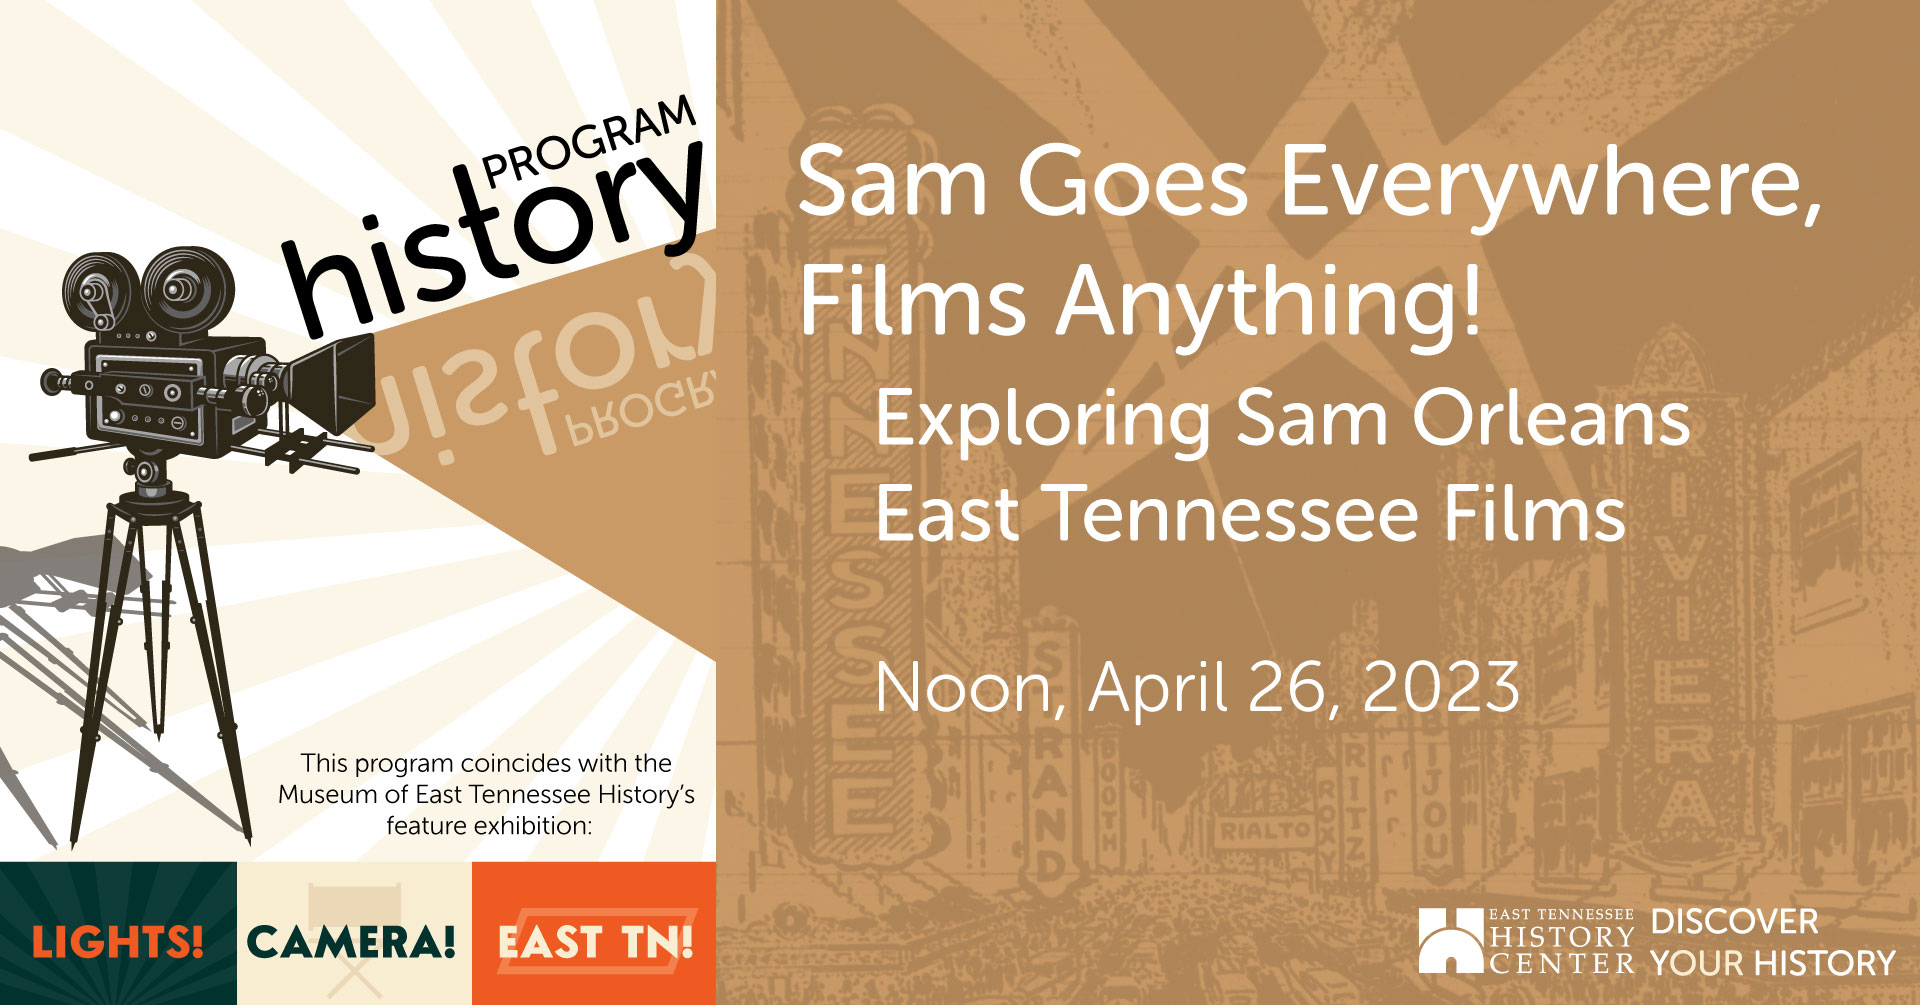 Sam Goes Everywhere, Films Anything! Exploring Sam Orleans East Tennessee Films